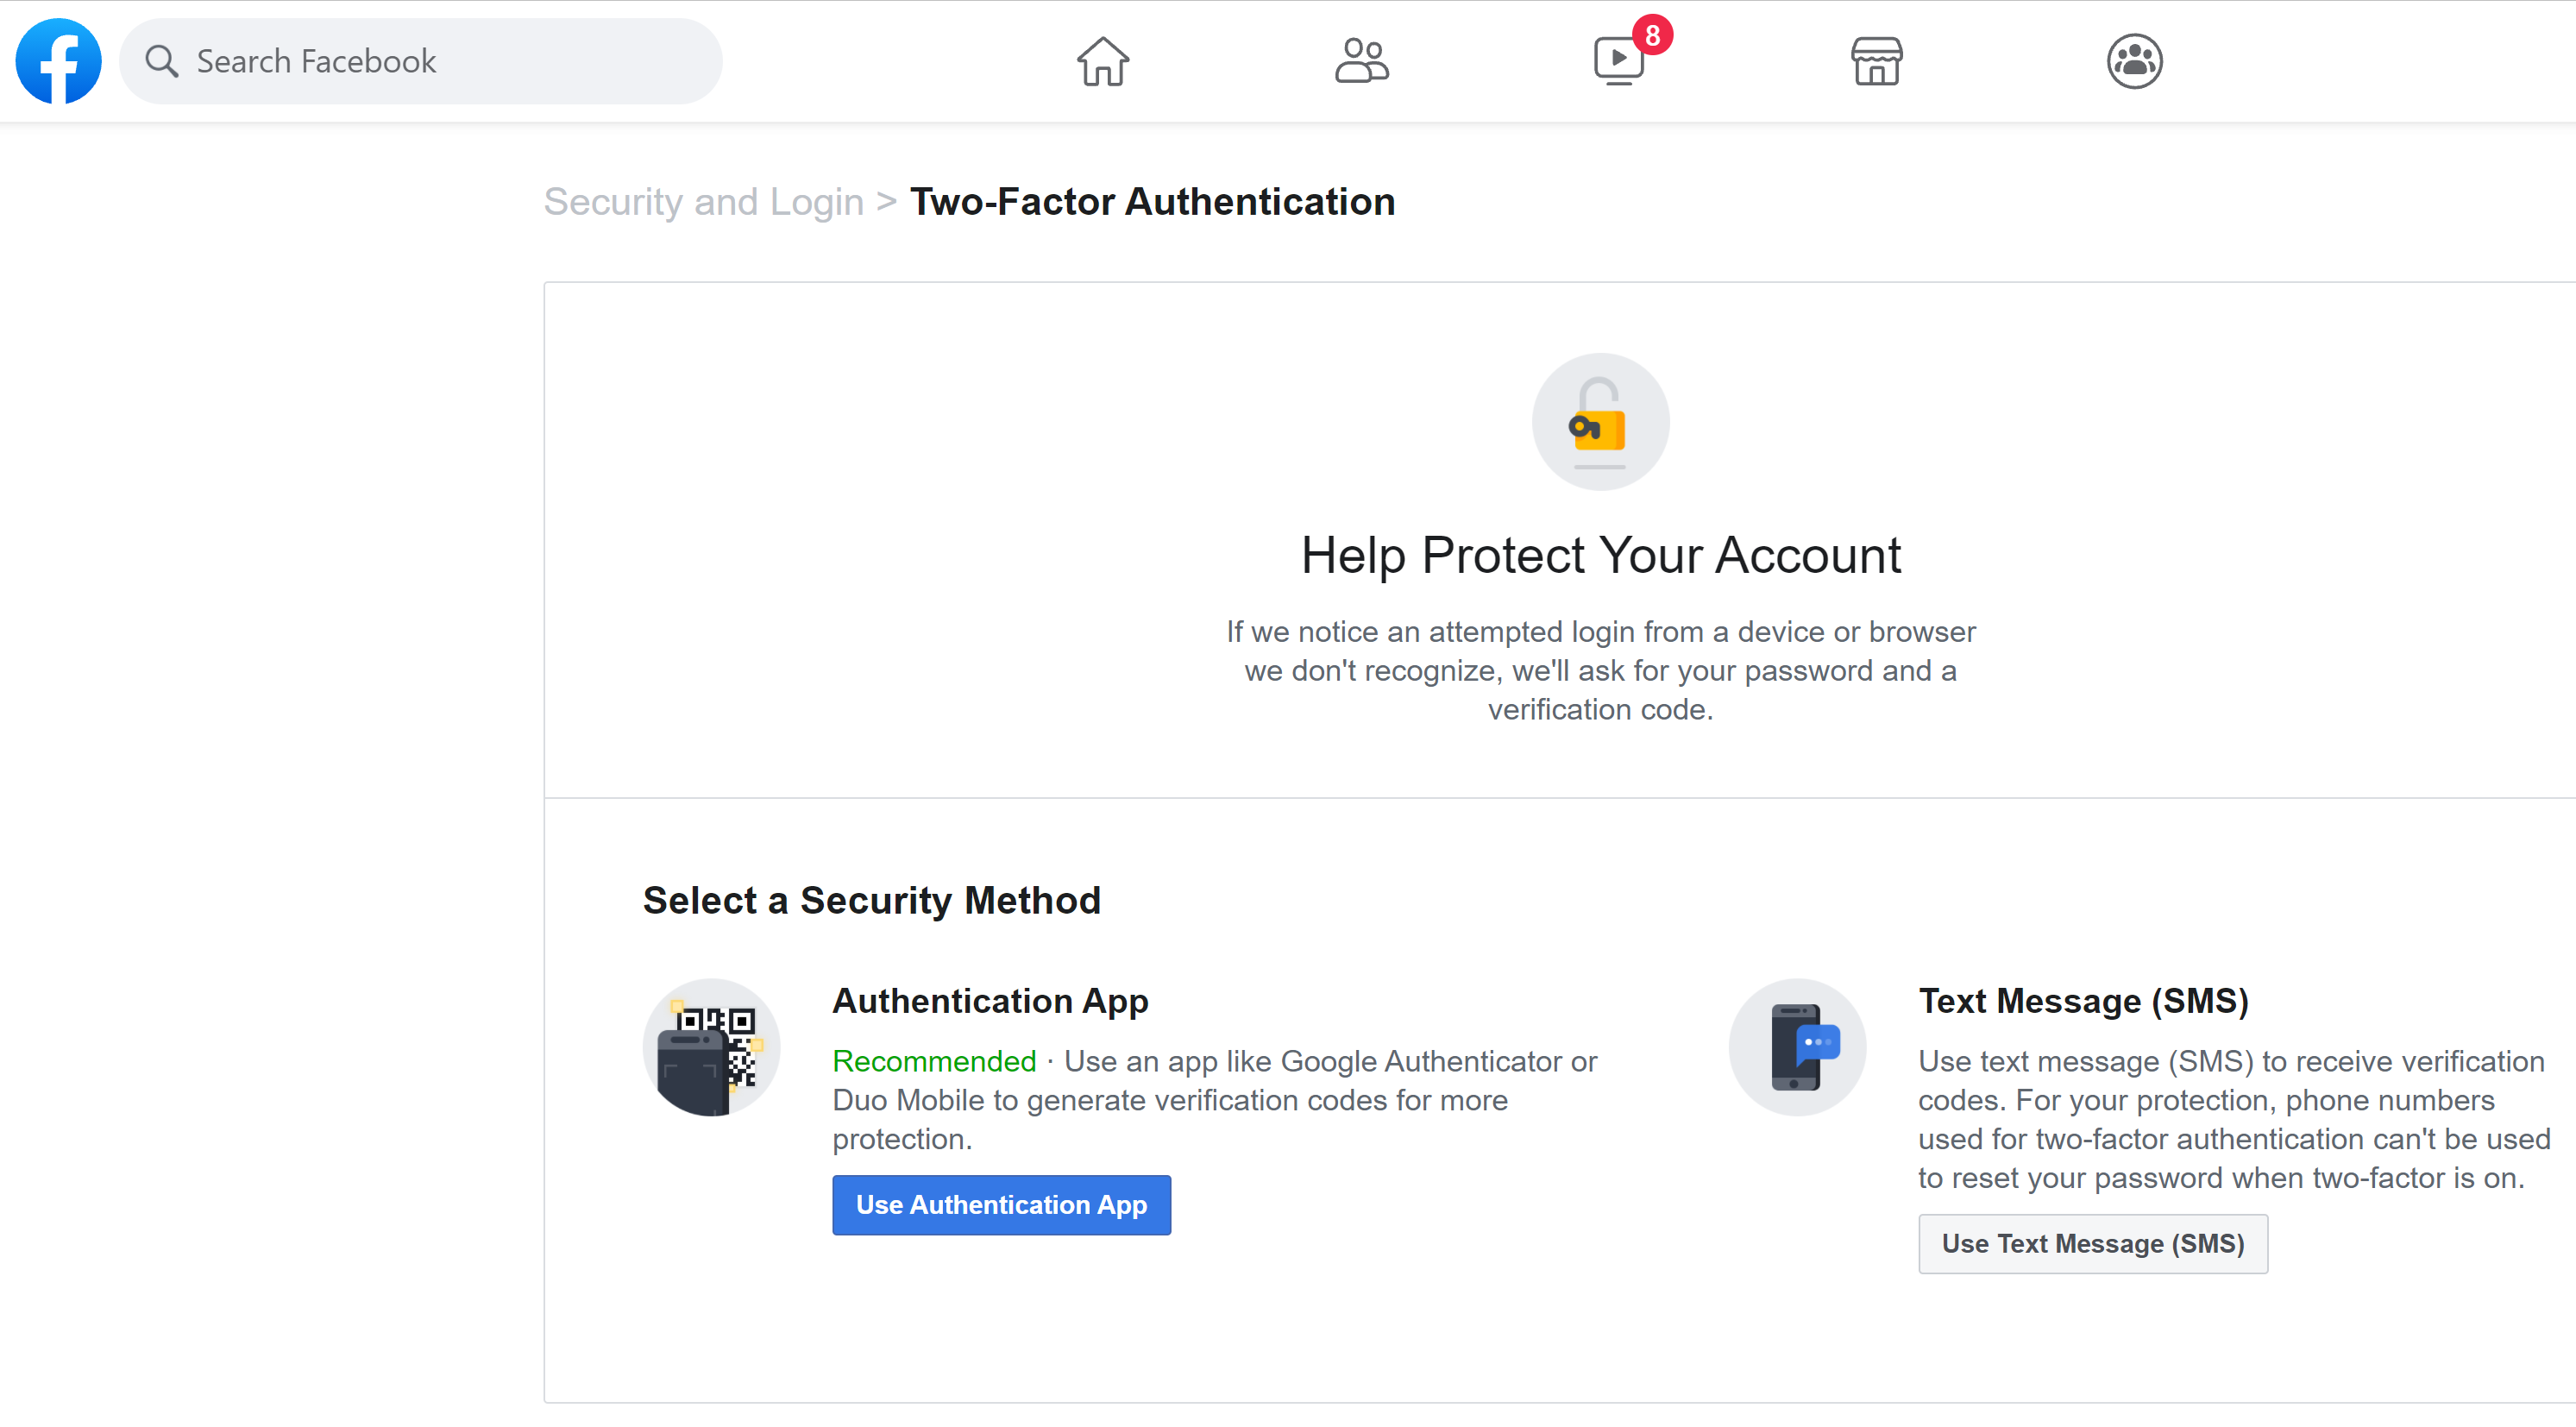 How to create Facebook App for Facebook Login Authentication?